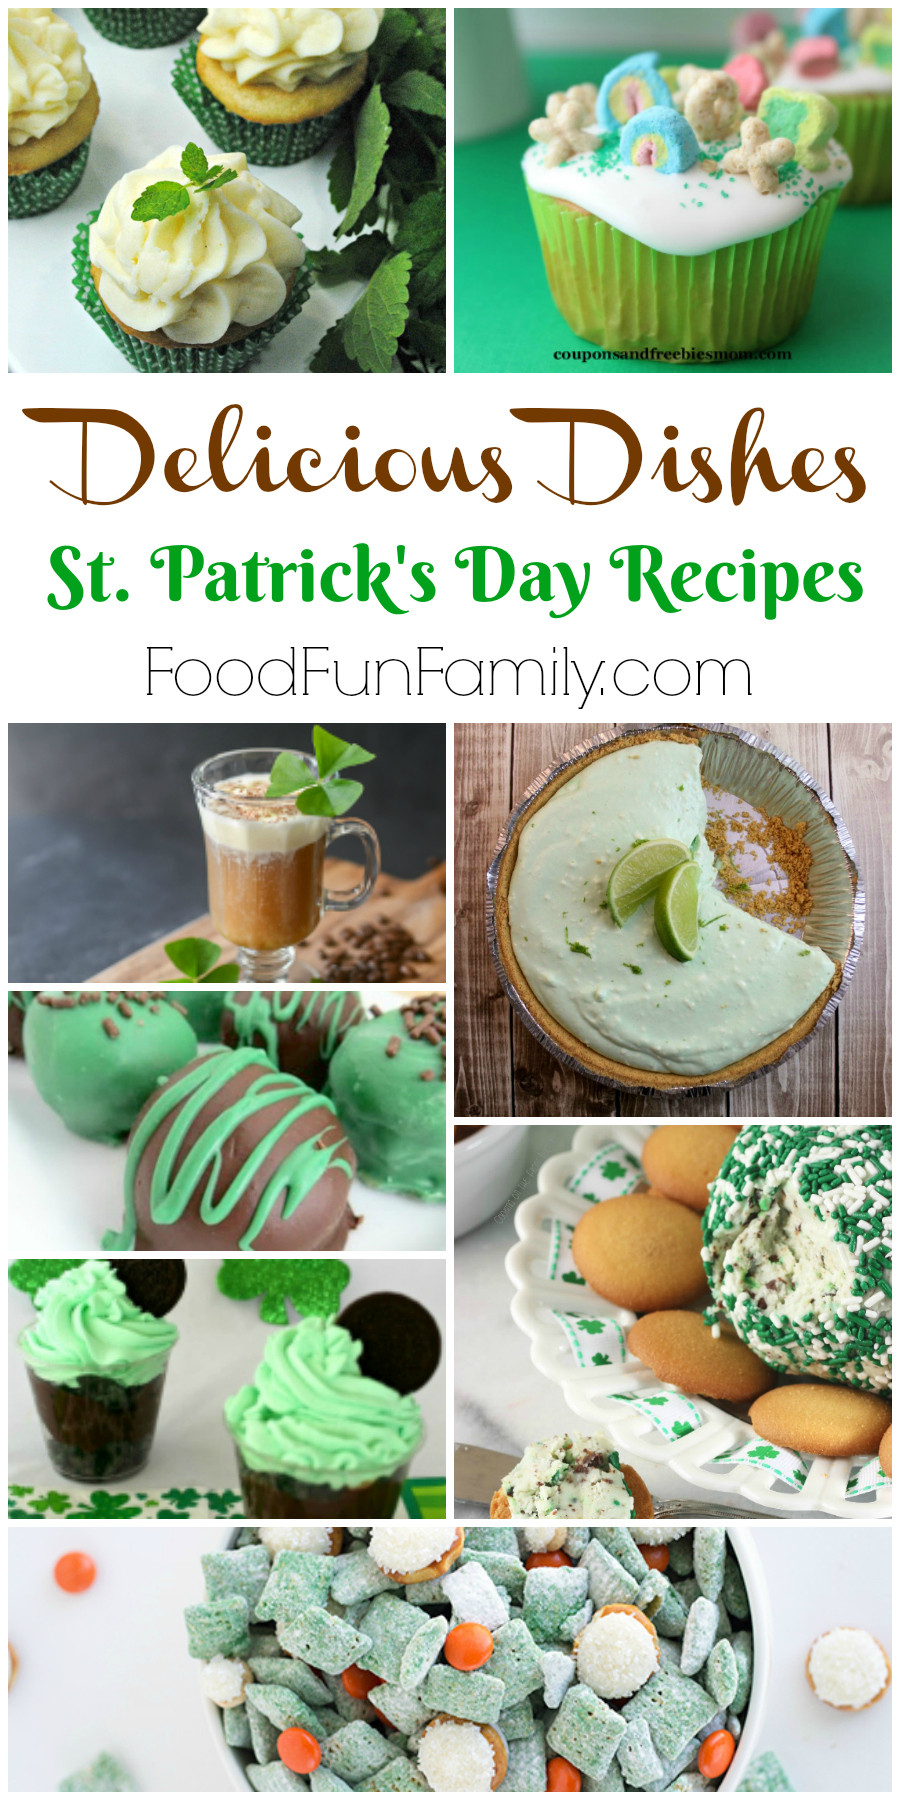 Fun St Patrick's Day Food
 Festive St Patrick’s Day Recipes – Delicious Dishes